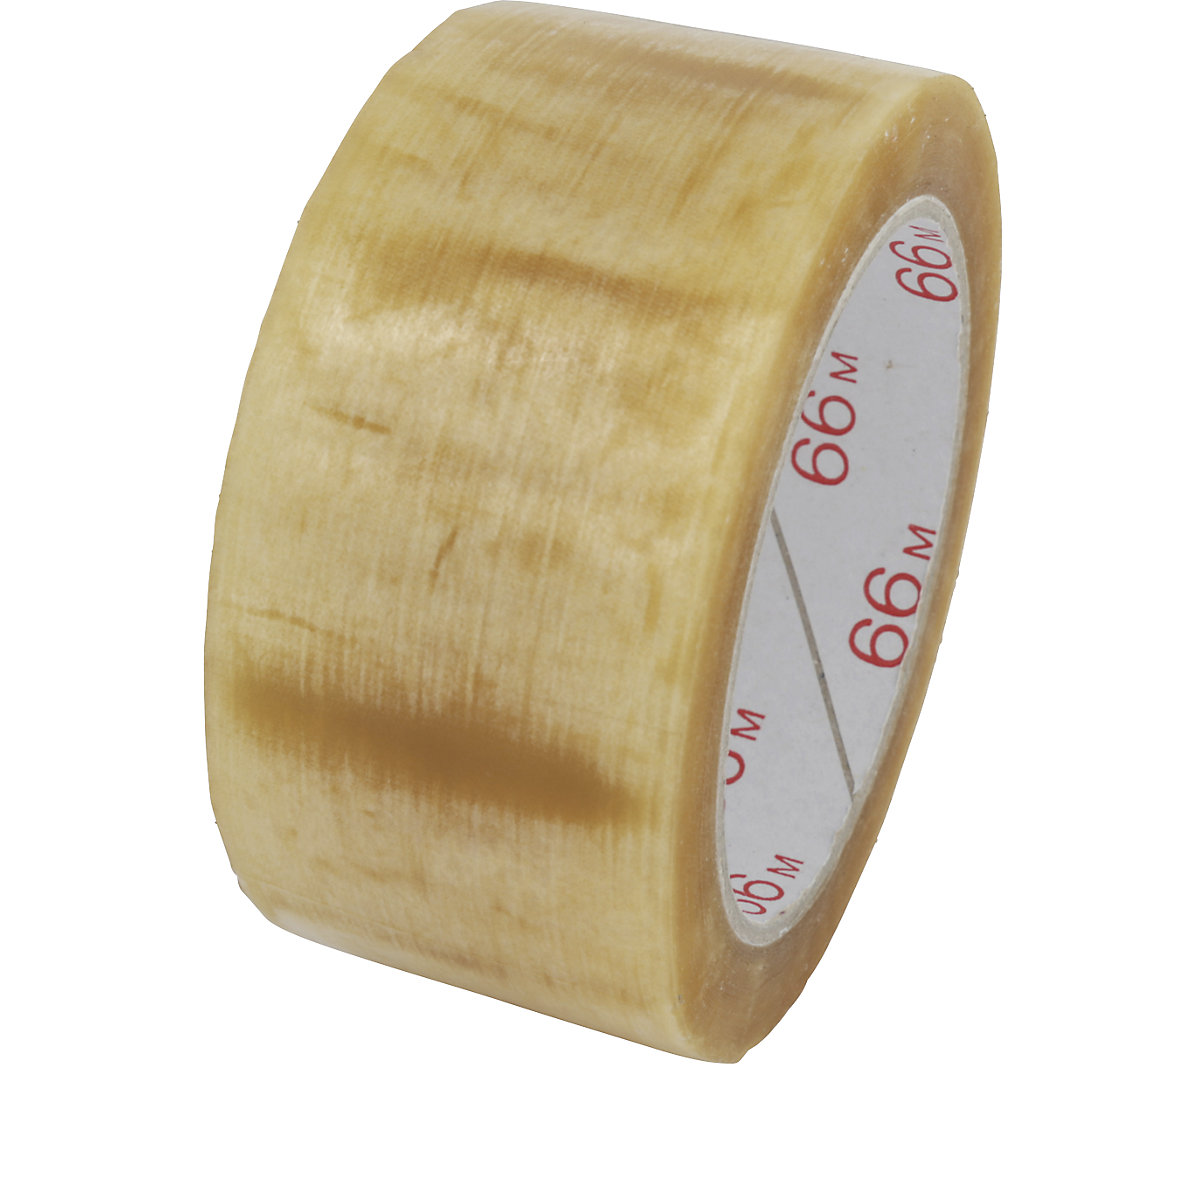 PP packing tape, quiet and extra strong model, pack of 36 rolls, transparent, tape width 50 mm, natural rubber adhesive-3